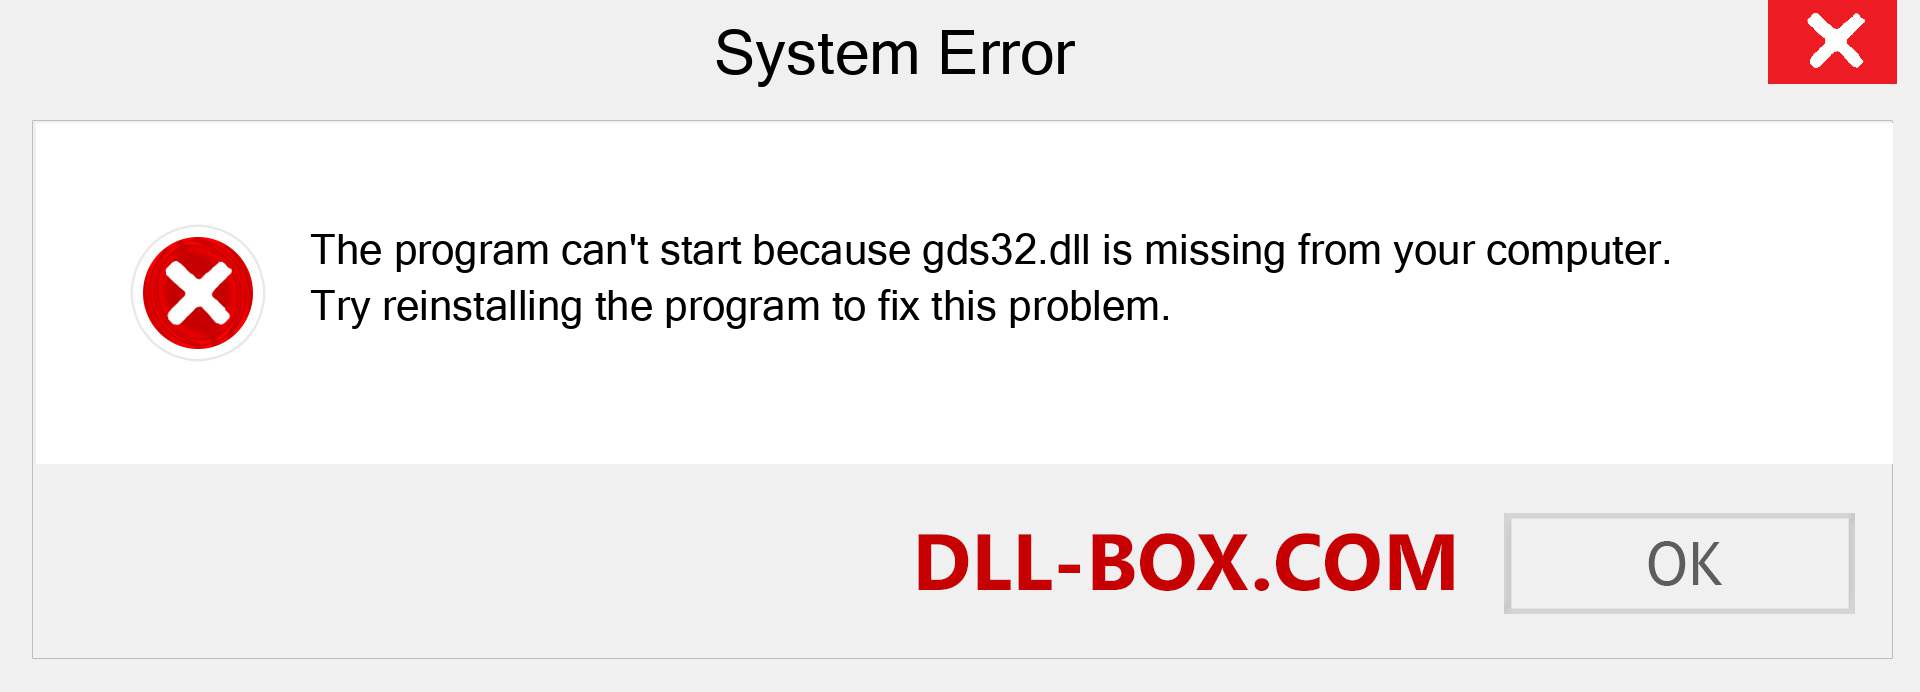  gds32.dll file is missing?. Download for Windows 7, 8, 10 - Fix  gds32 dll Missing Error on Windows, photos, images